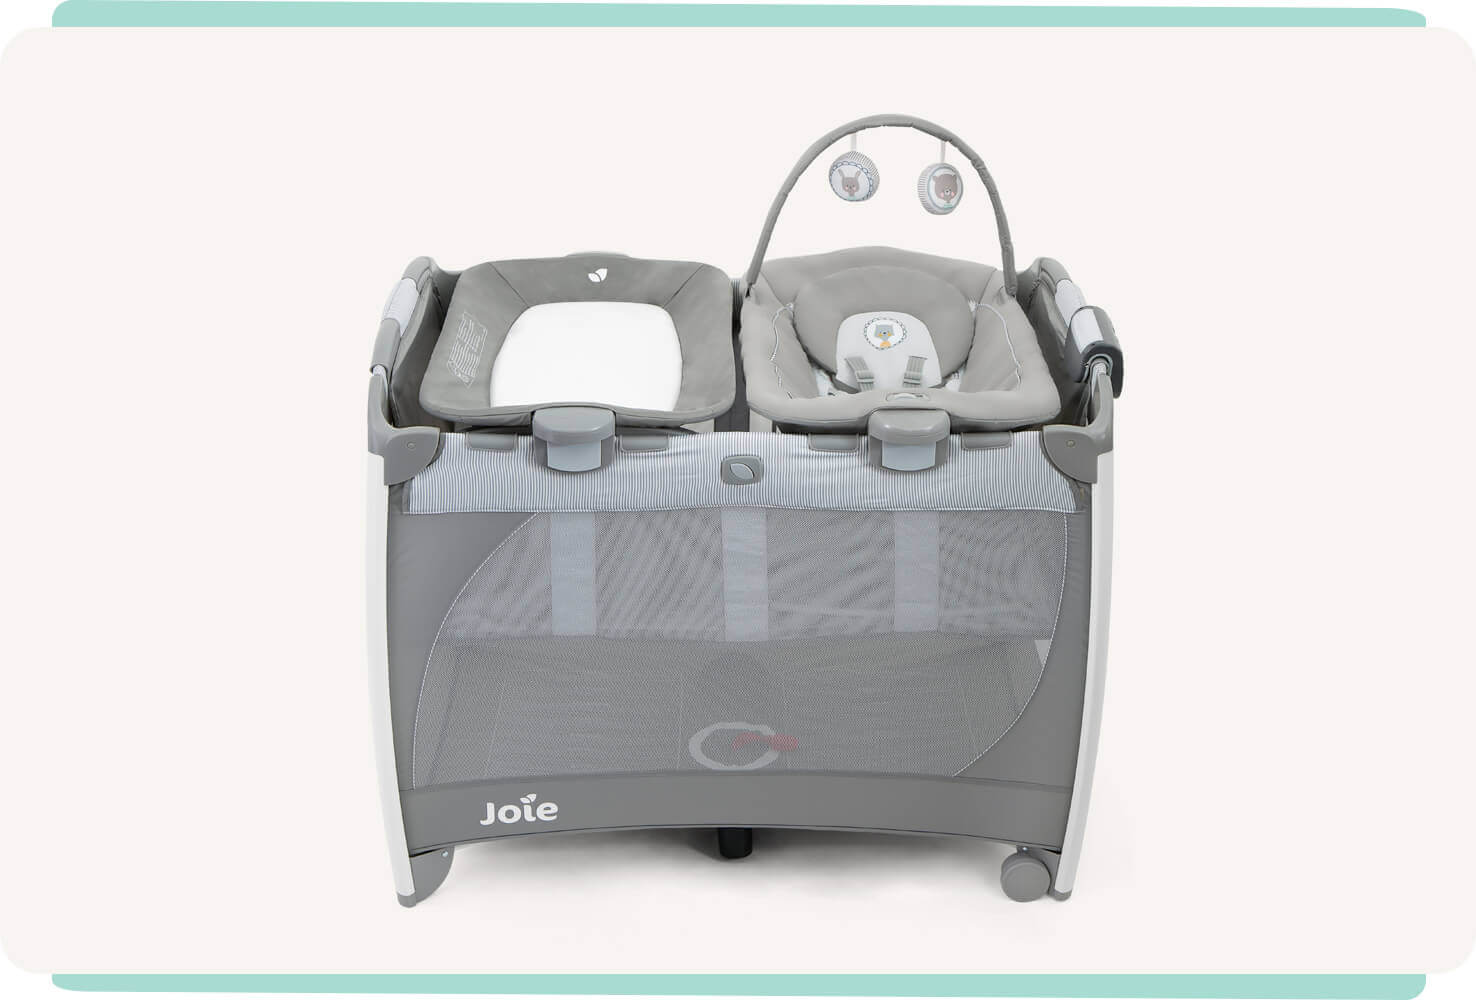 Joie excursion change and bounce travel cot in gray with cartoon imagery with changer and bouncer removed straight on.